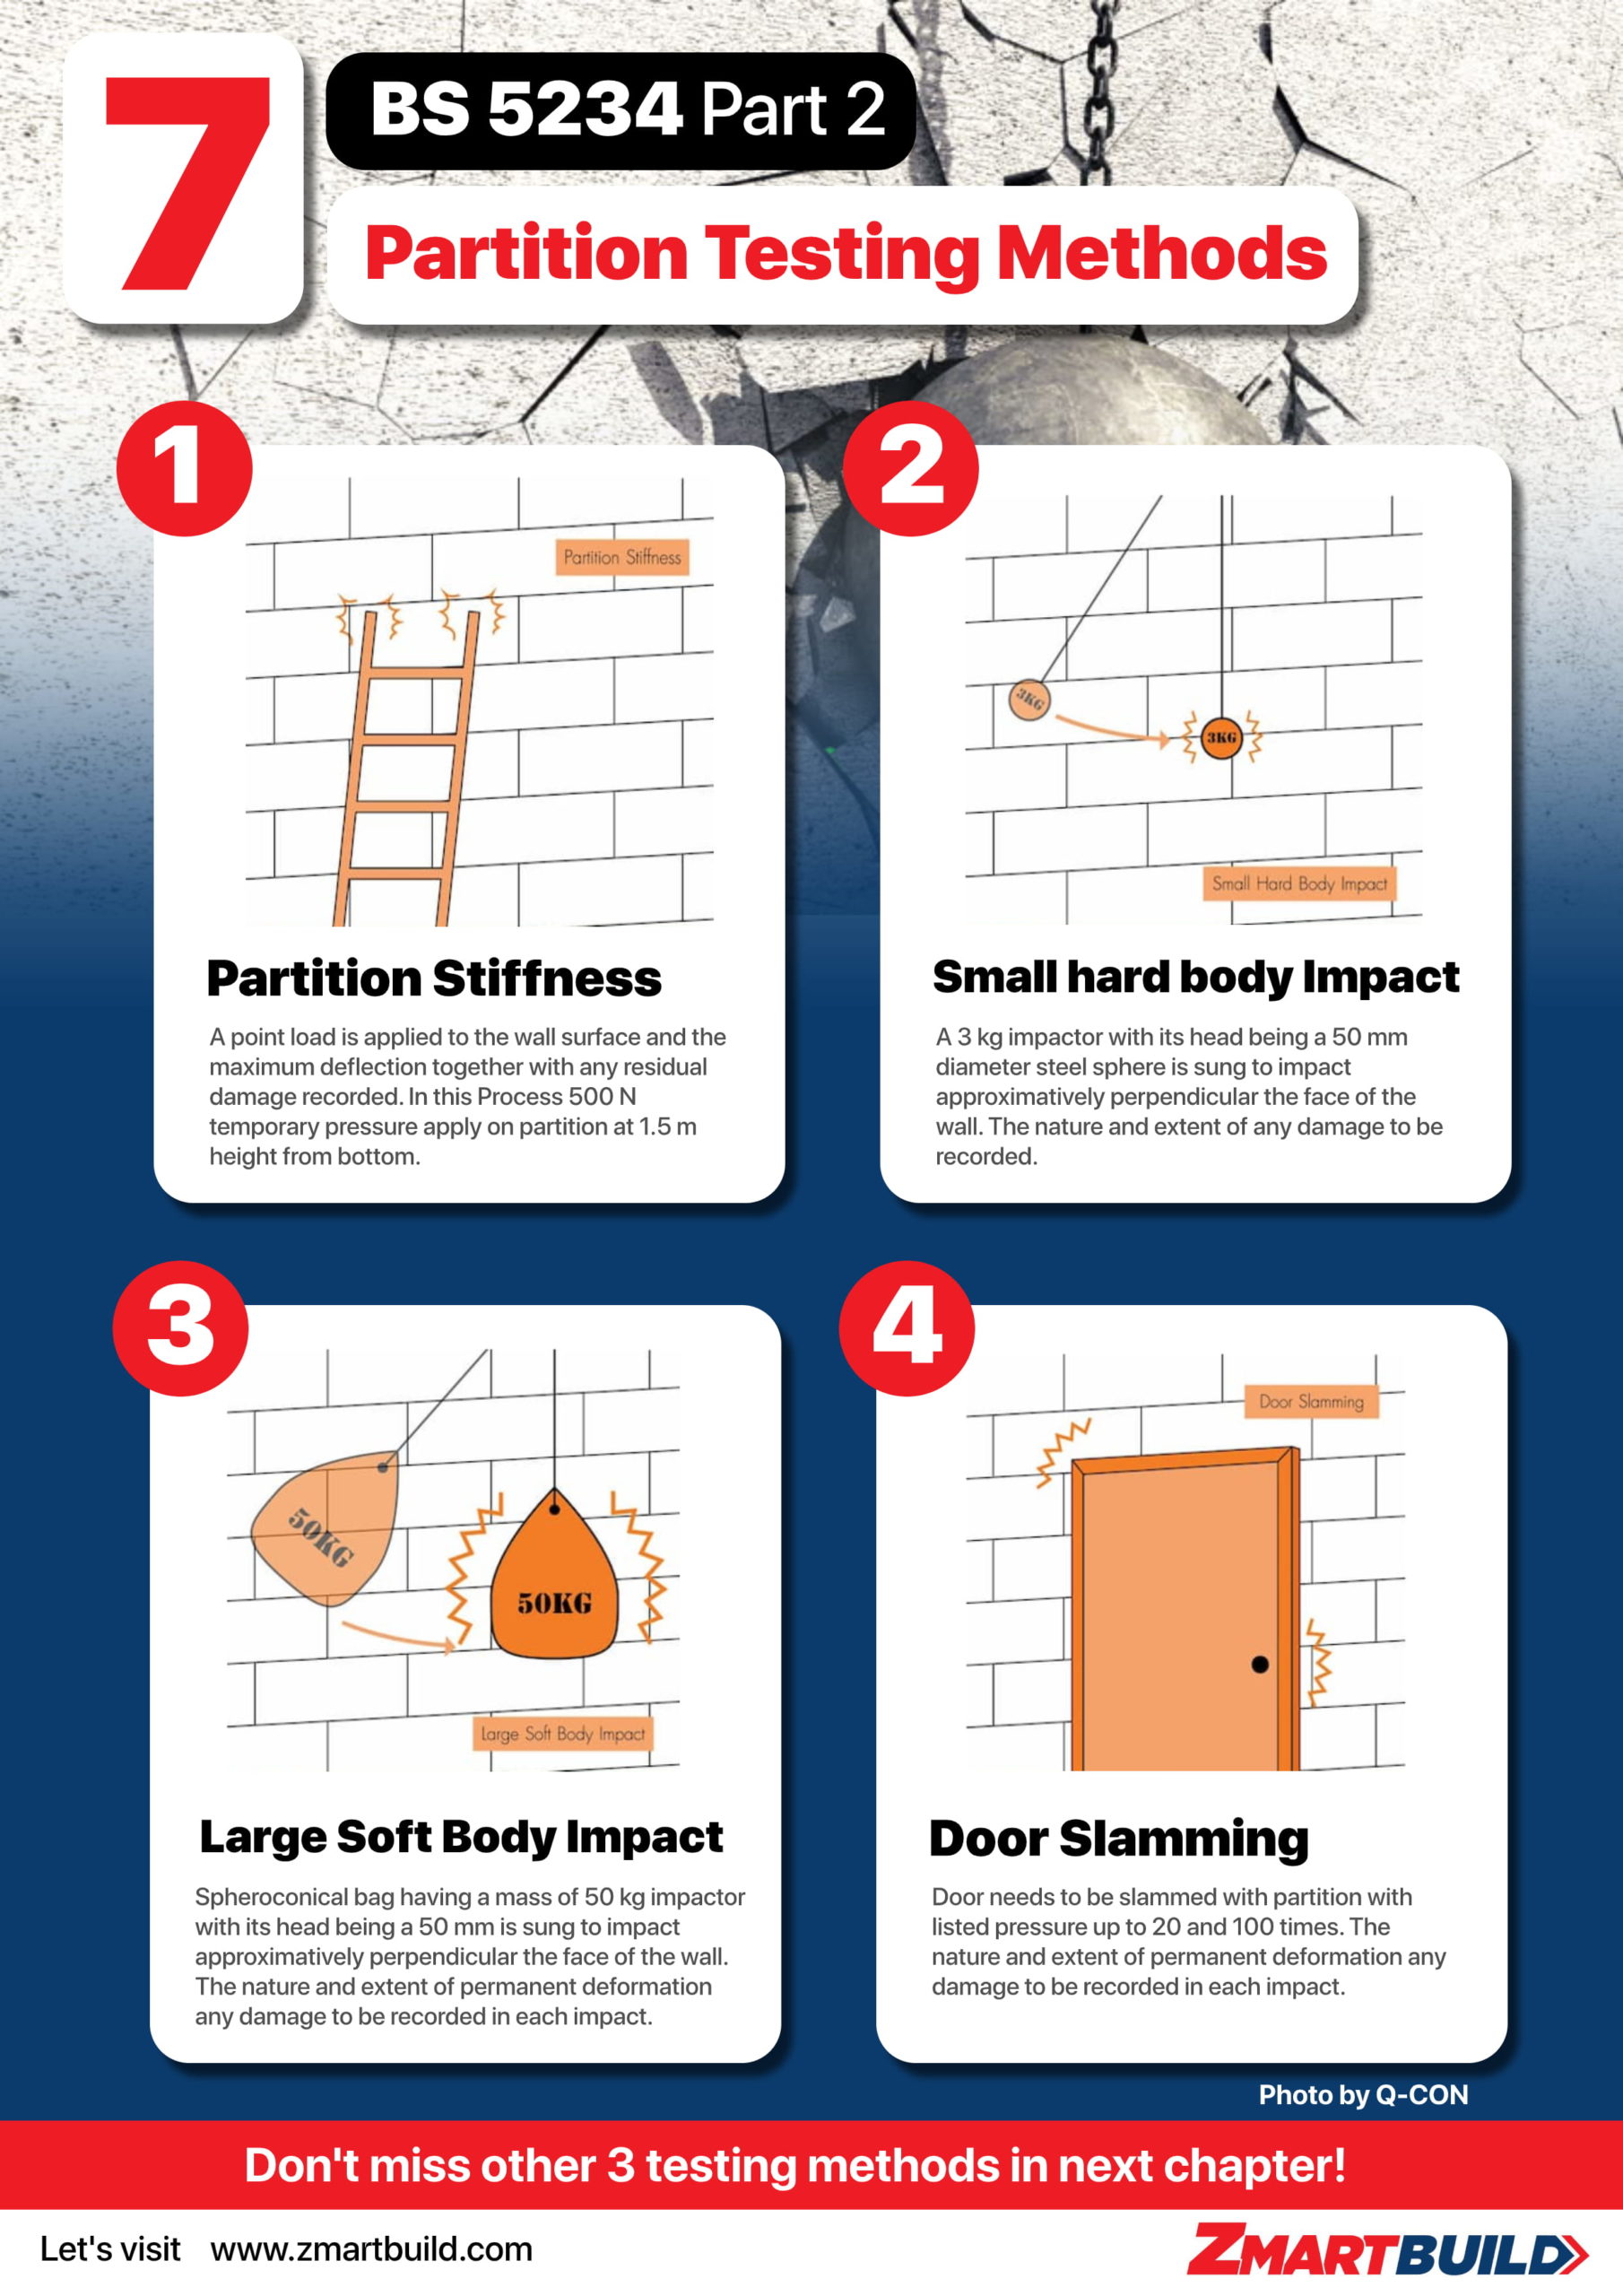 7 Wall PartitionTesting Method Part 1 - Infographic